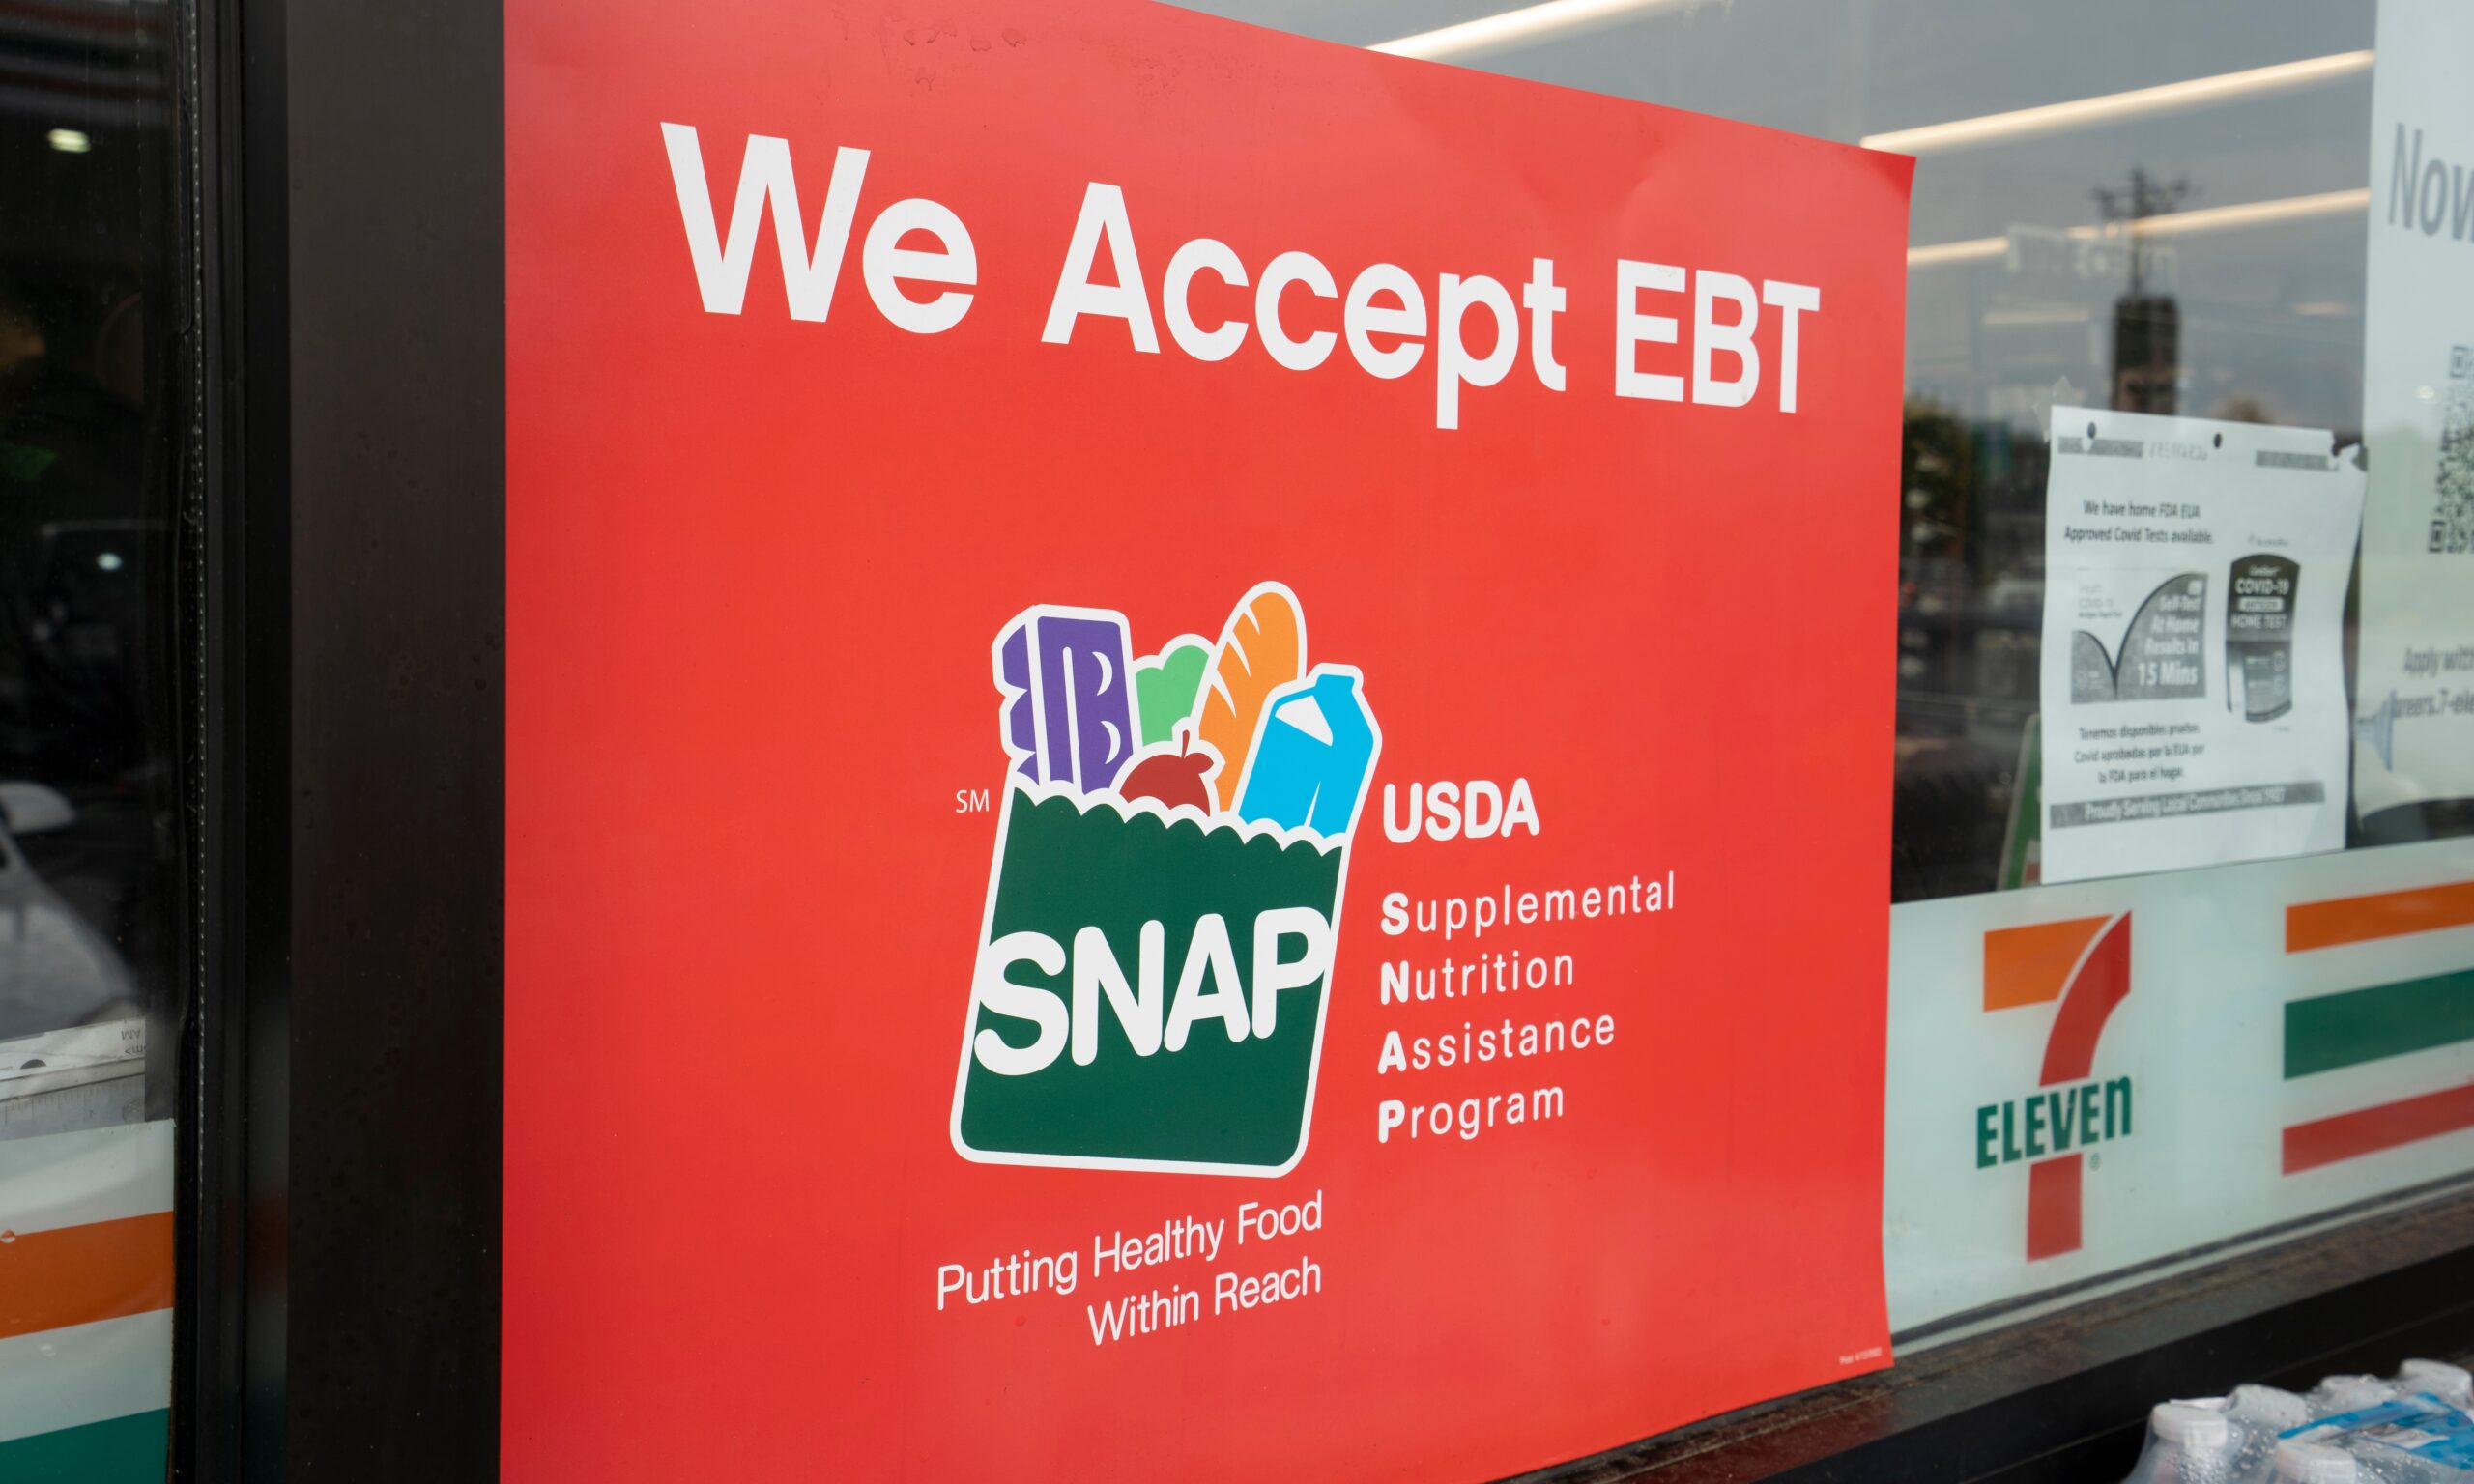 A photograph of a red sign on a 7 Eleven door that says "We Accept EBT" with the USDA SNAP logo on it.